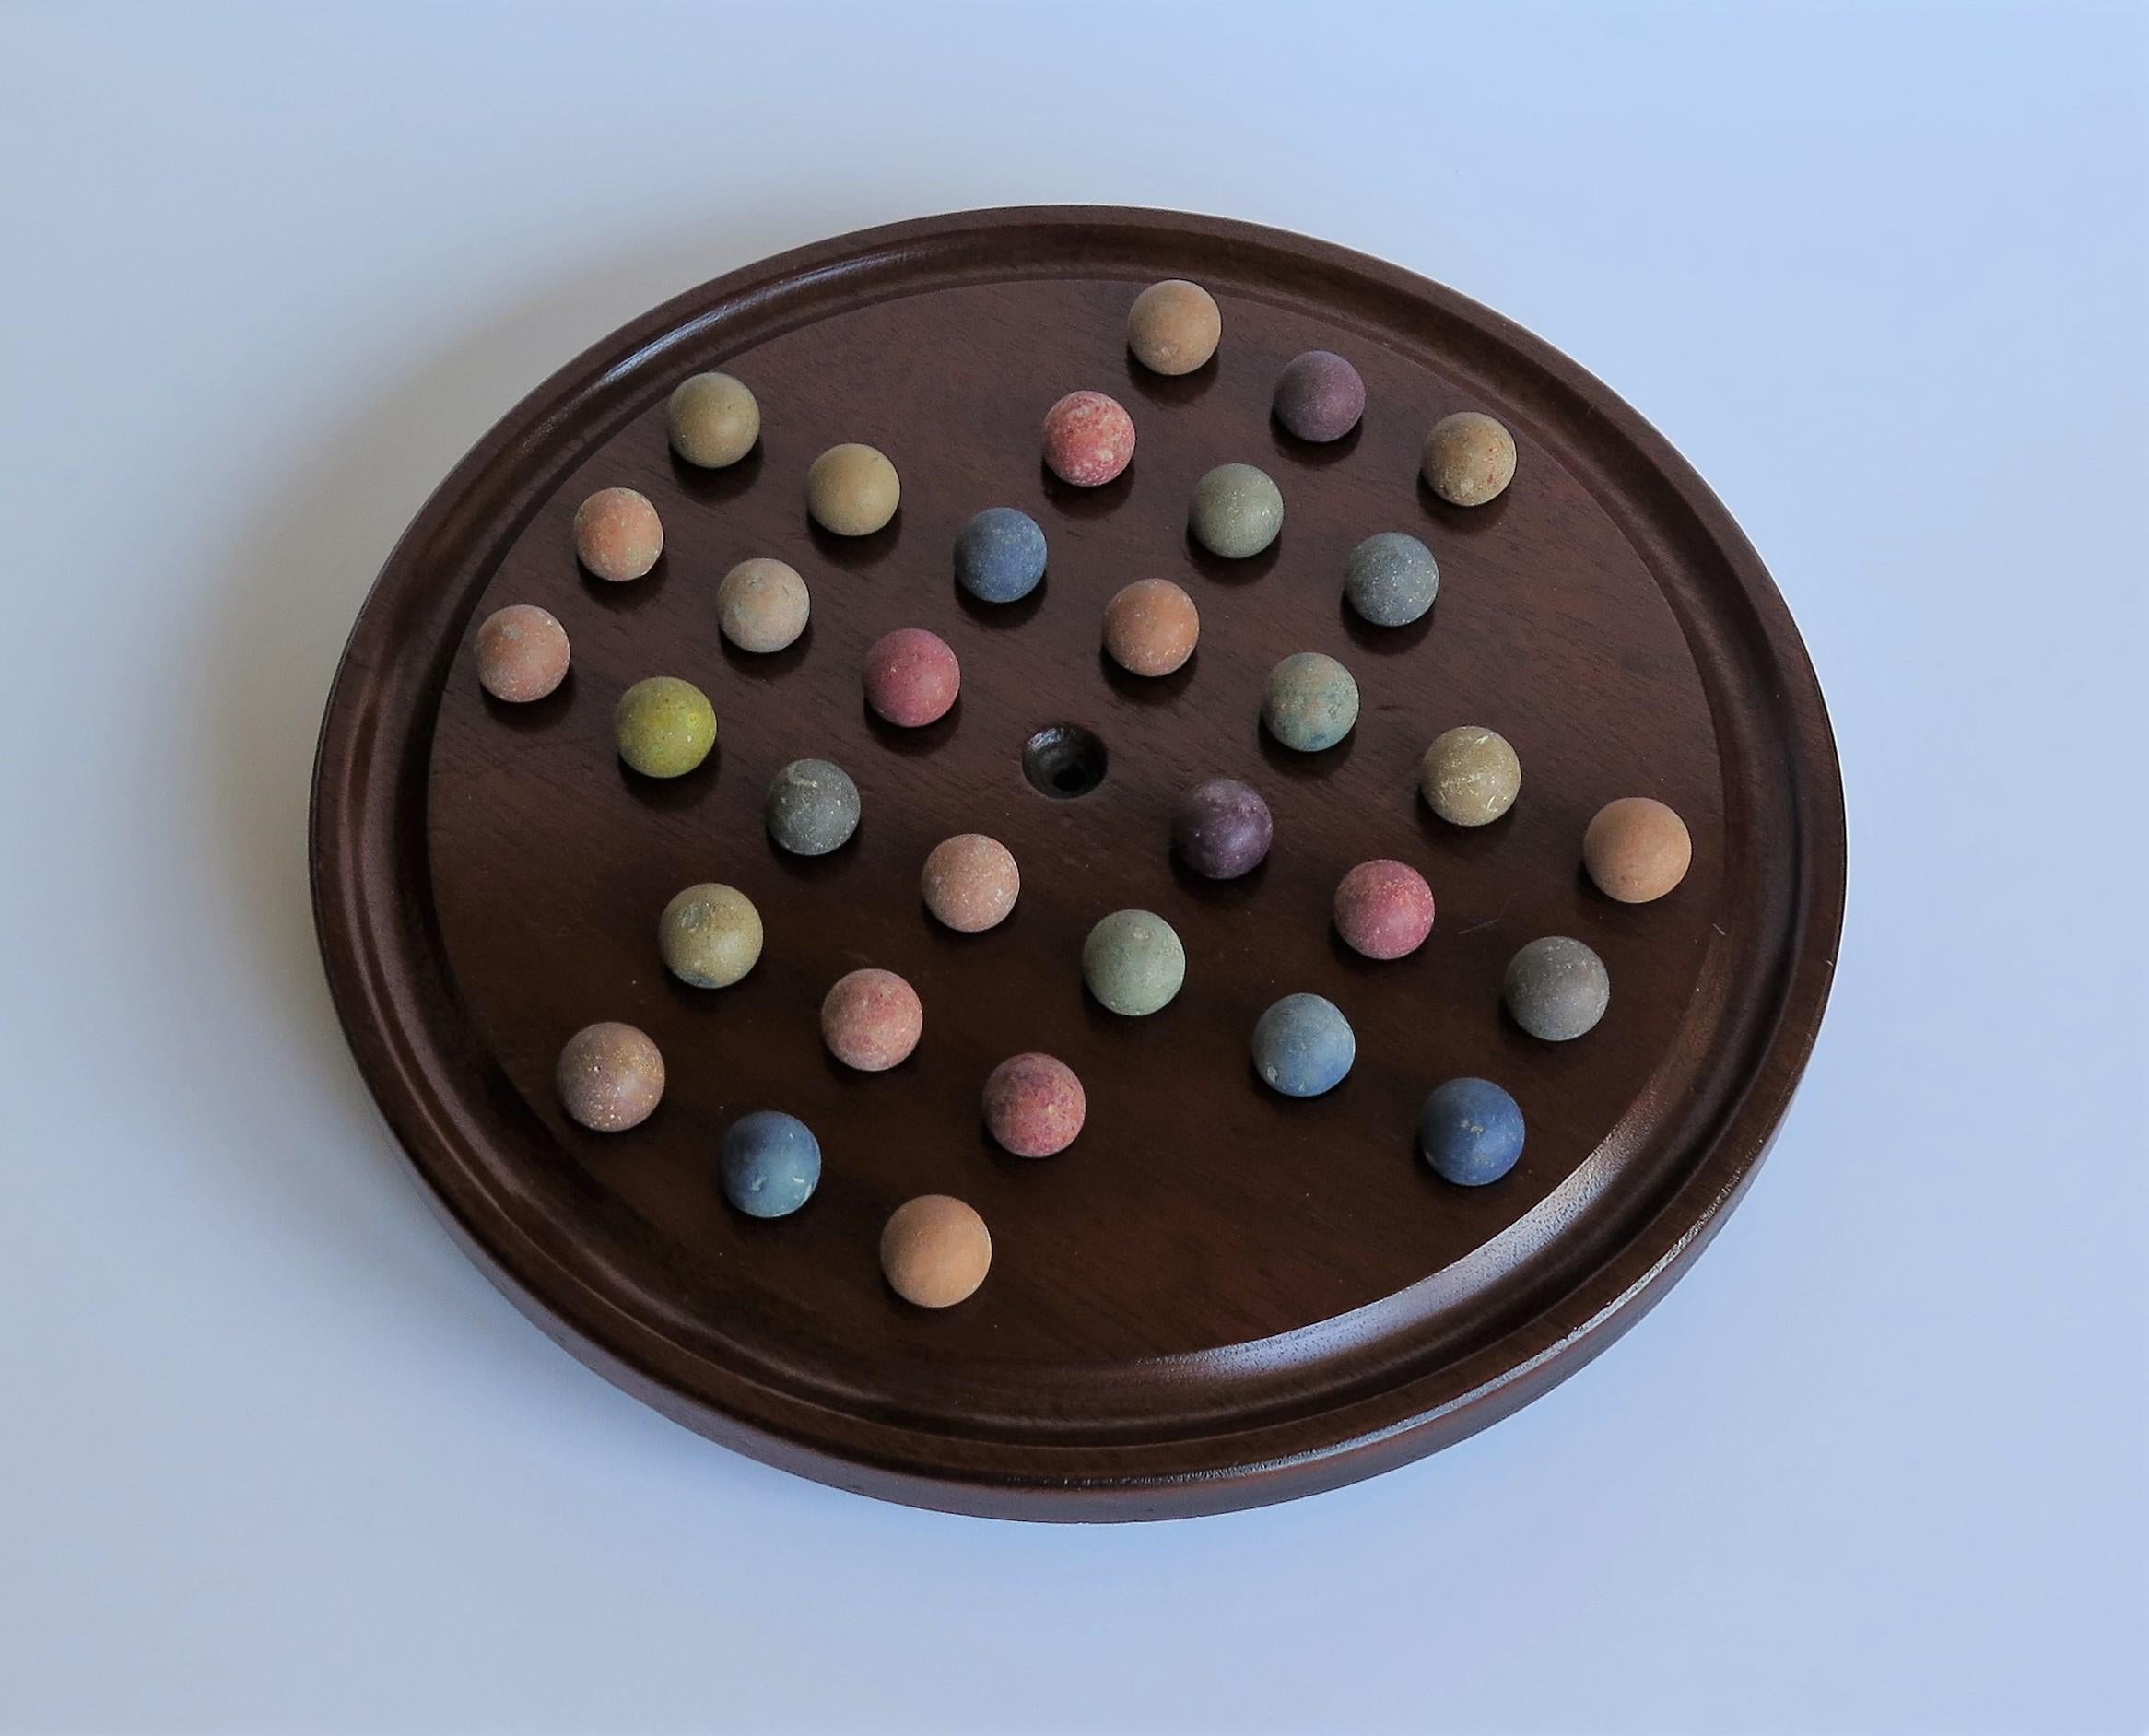 This is a complete Victorian board game of marble solitaire, with a lovely hand turned mahogany board and 32 early ceramic clay and stone hand made marbles, all dating to the 19th century. 

The circular board has a larger than normal diameter of